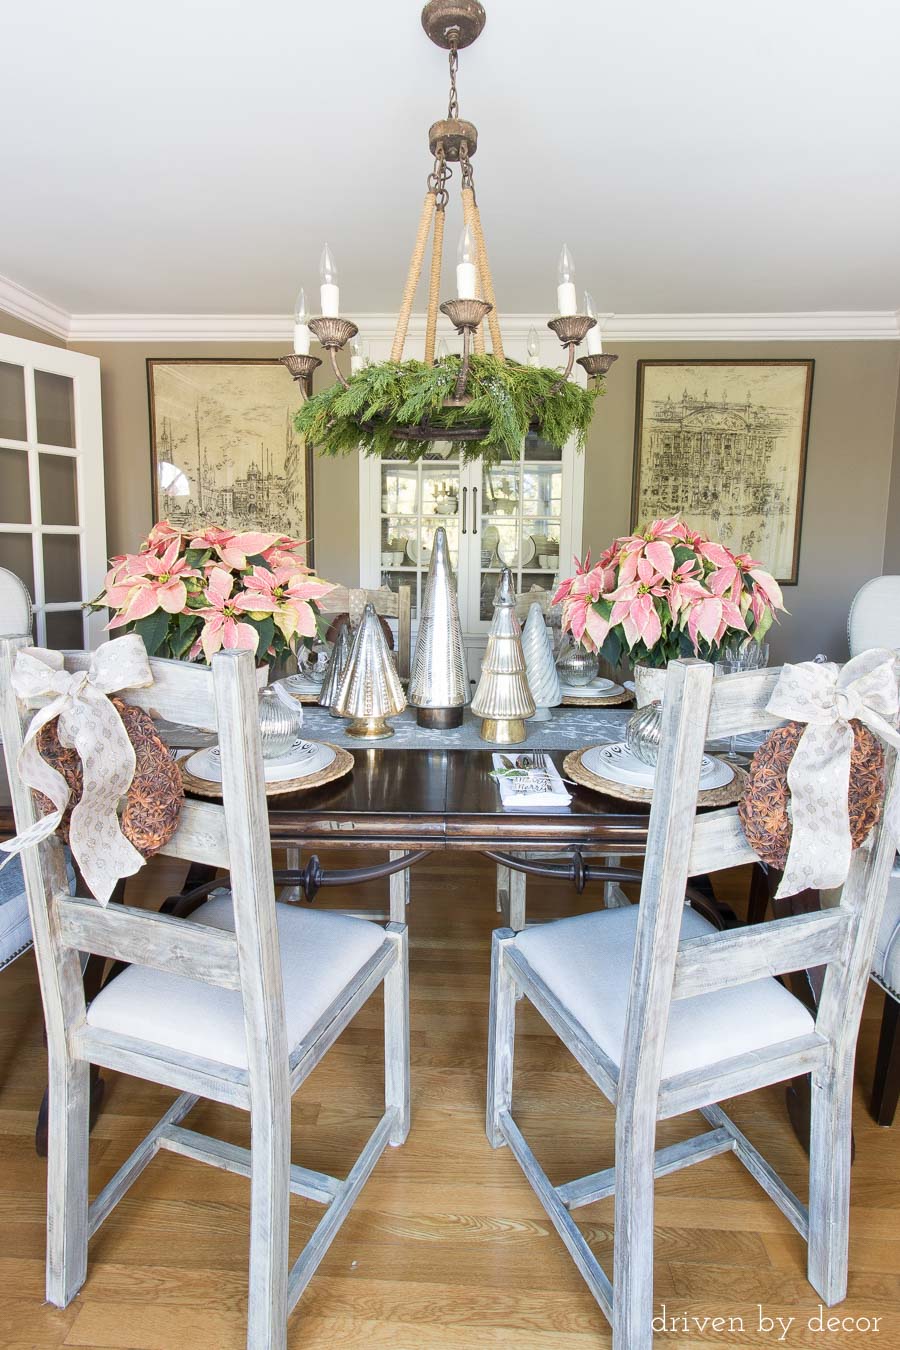 Love the star anise wreaths tied onto the backs of her dining room chairs for Christmas!